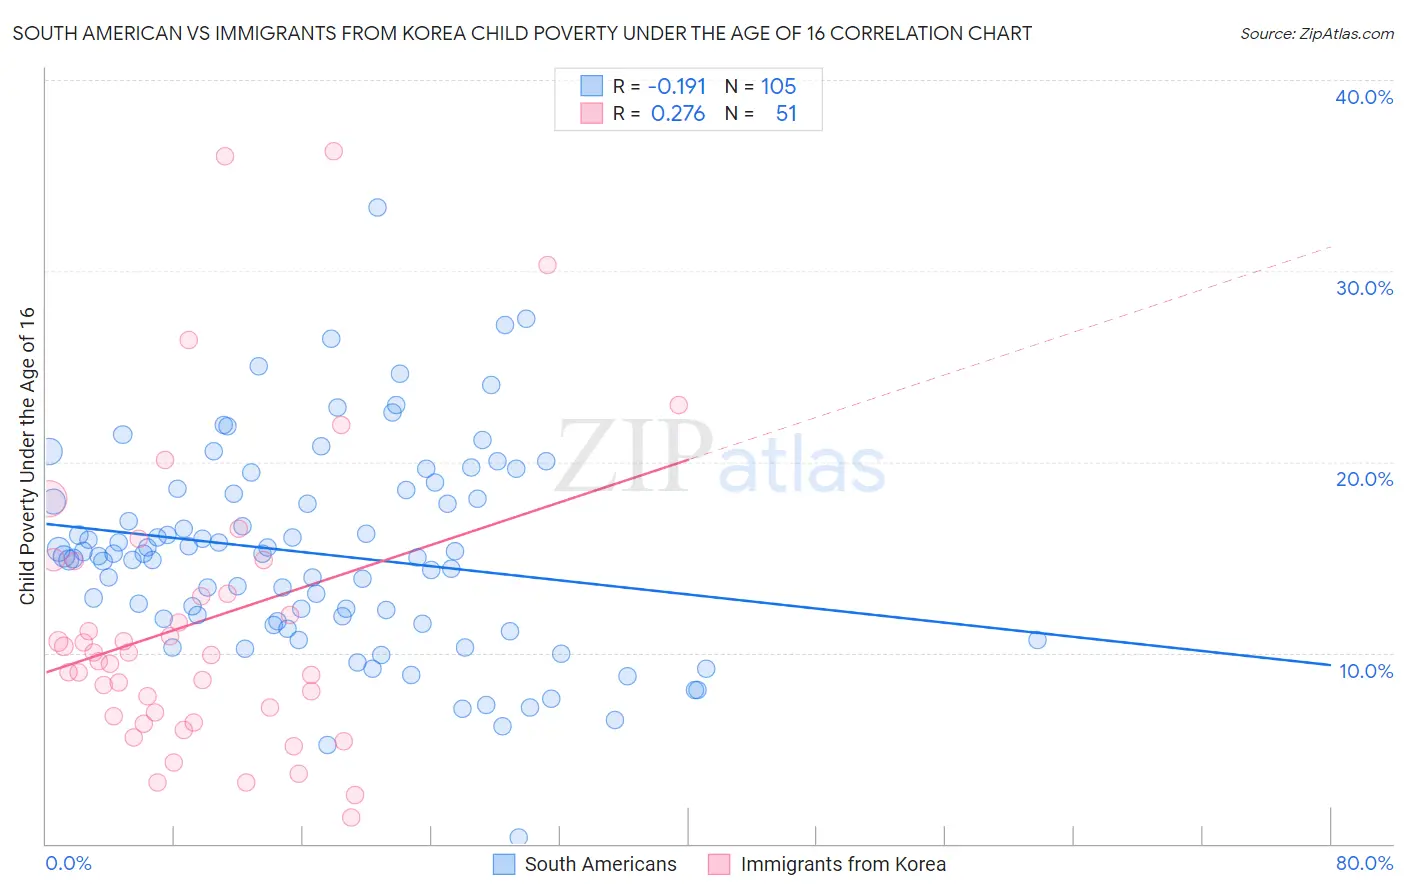 South American vs Immigrants from Korea Child Poverty Under the Age of 16